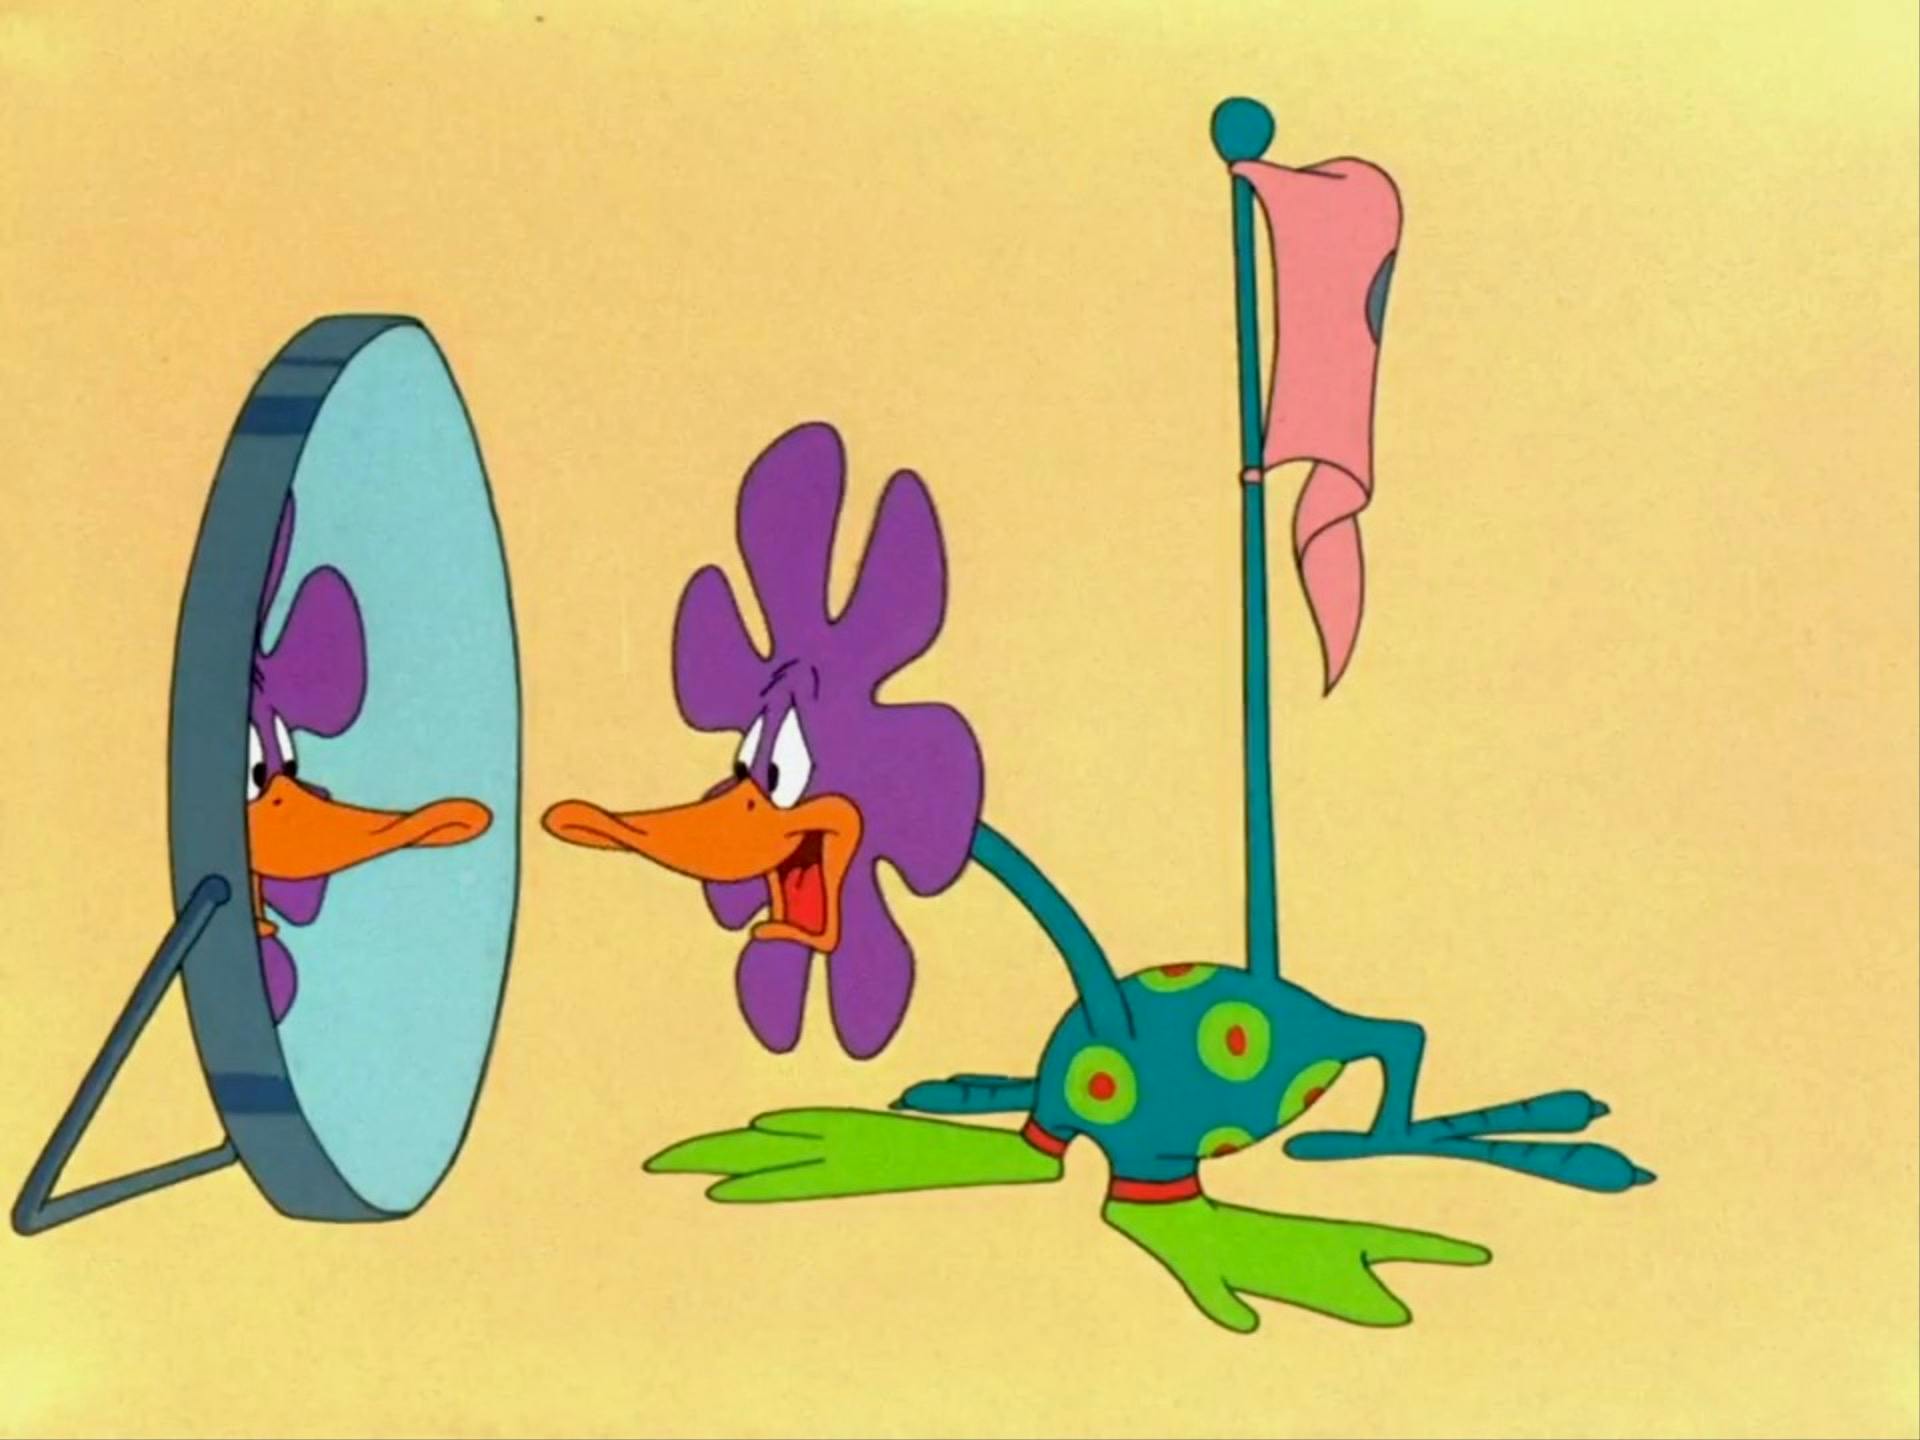 daffy duck looking into a mirror and designed with flower petals, a flag tail, and four webbed feet